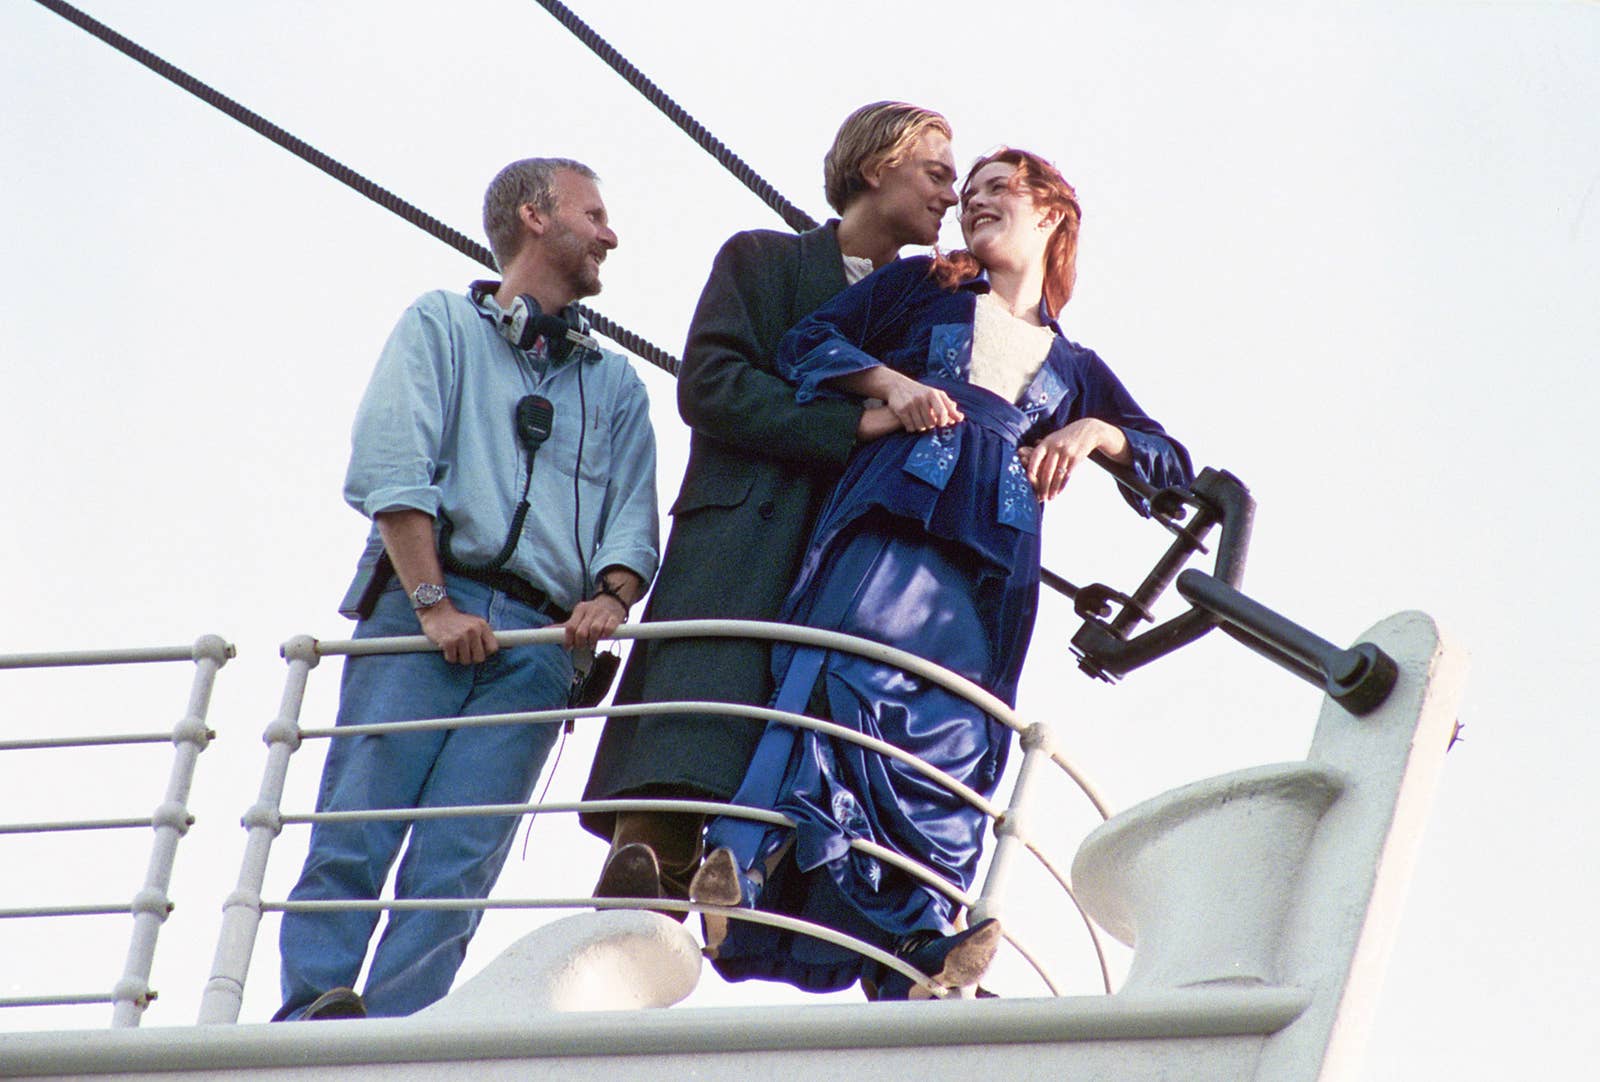 James Cameron directing Leonardo DiCaprio and Kate Winslet on the set of Titanic during the famous &quot;I&#x27;m flying&quot; scene